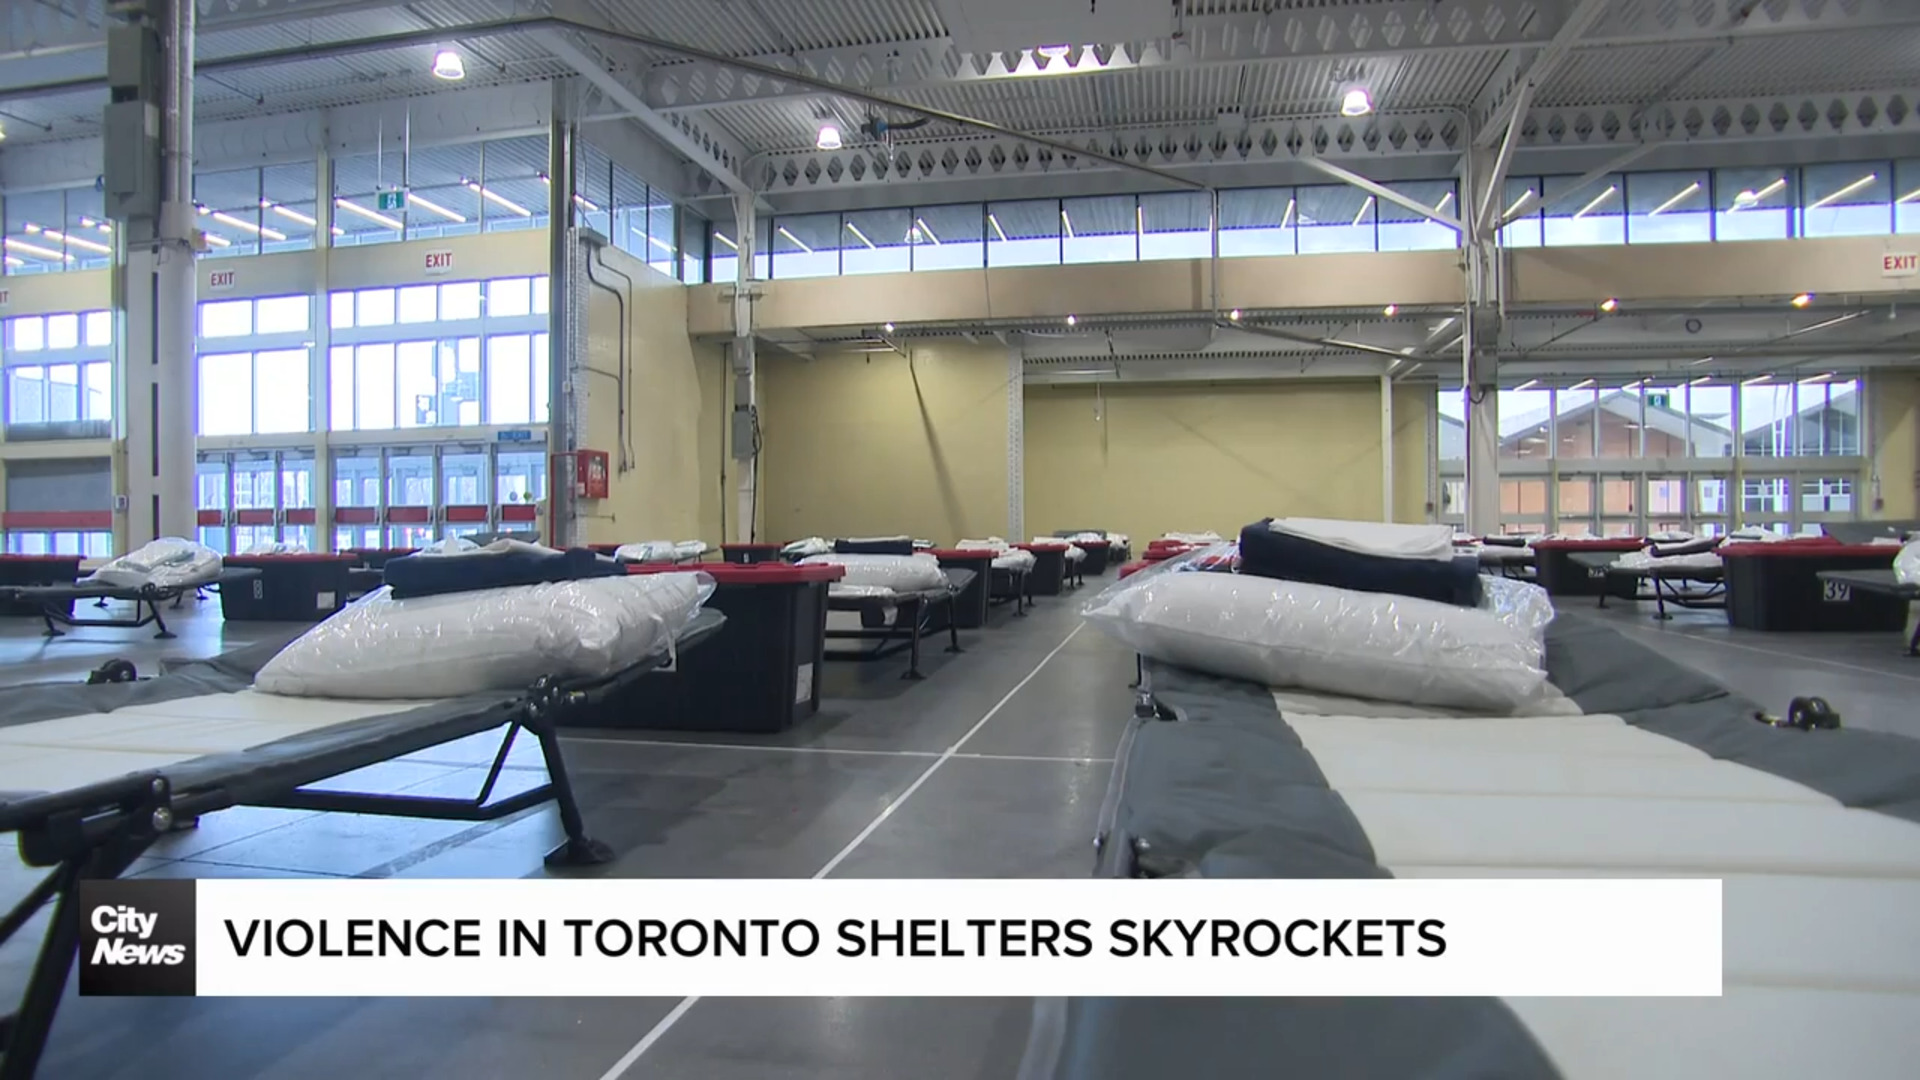 Violent incidents at Toronto shelters increase with overcrowding